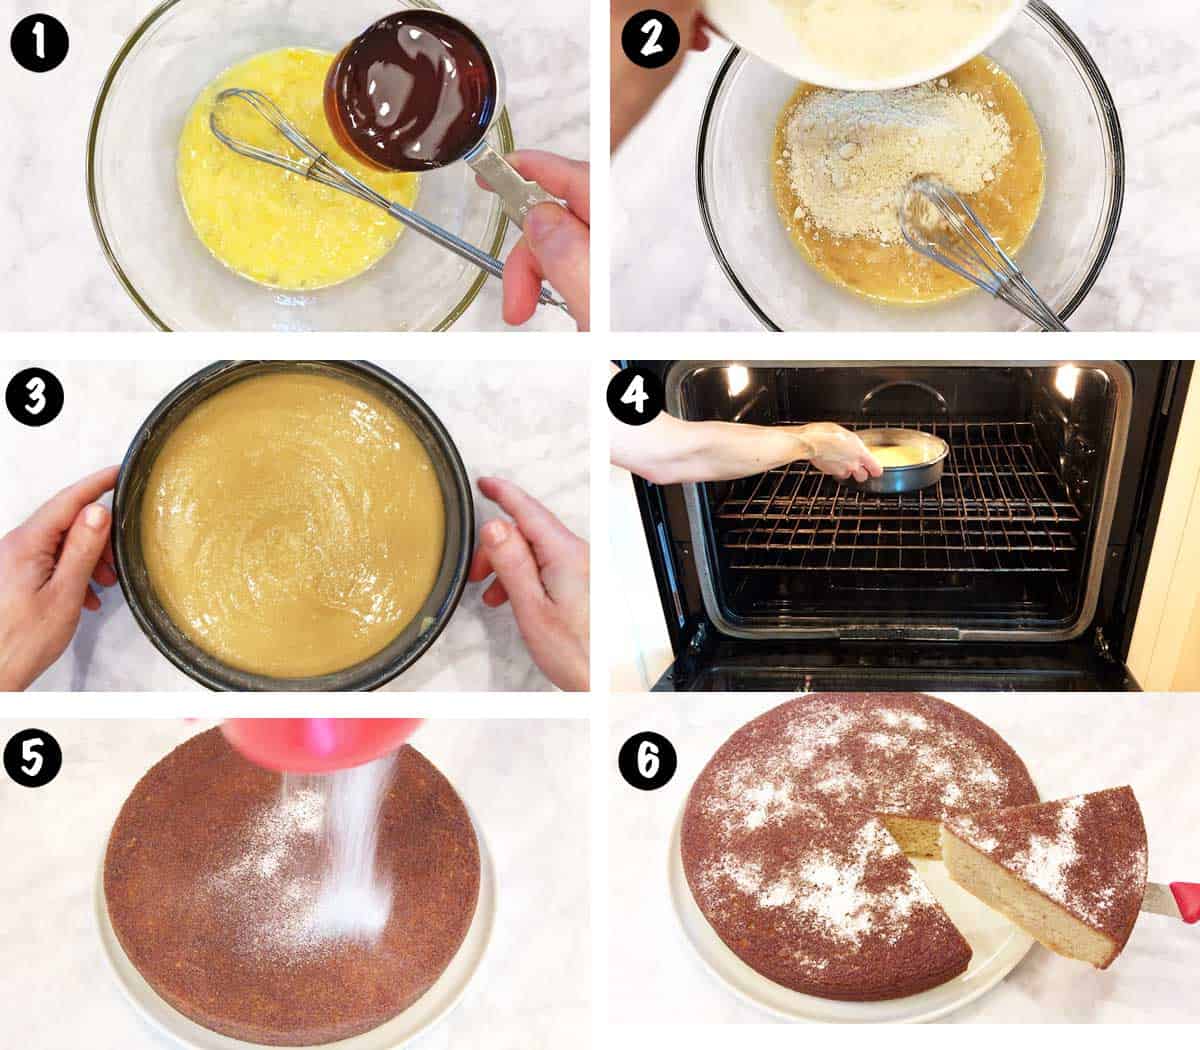 A photo collage showing the steps for baking an almond flour cake. 